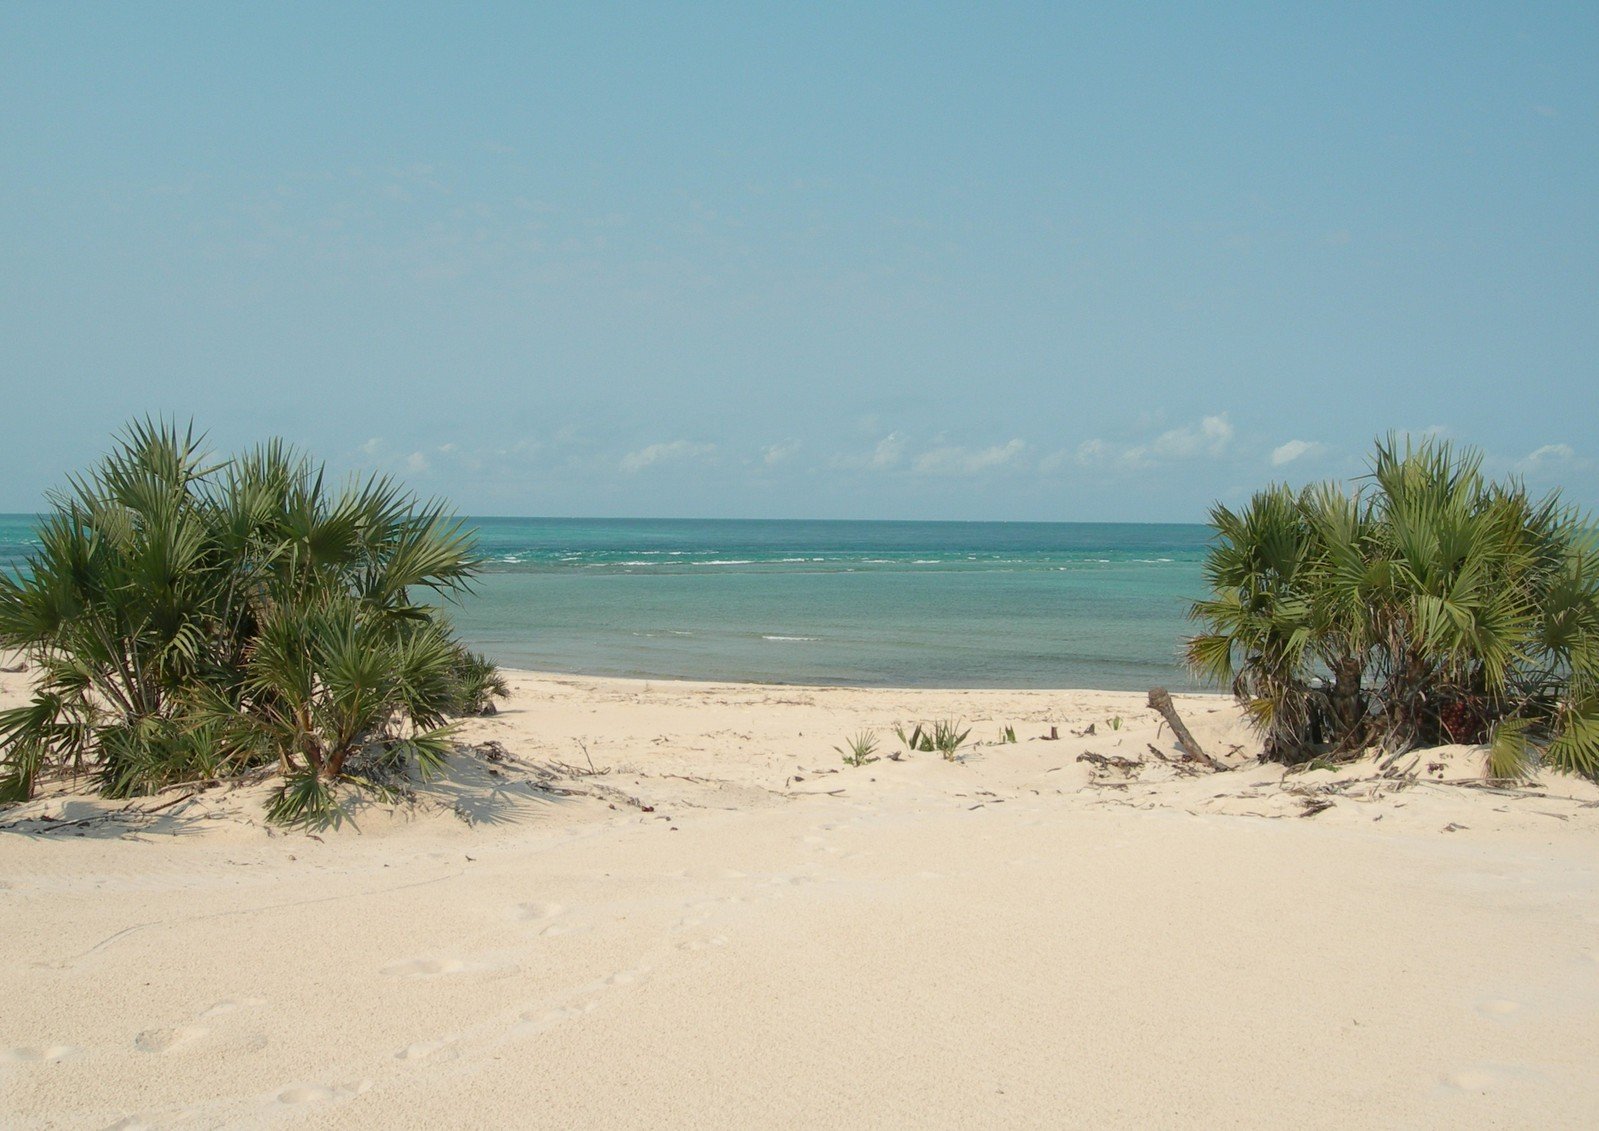 a beach area with grass and trees near the water